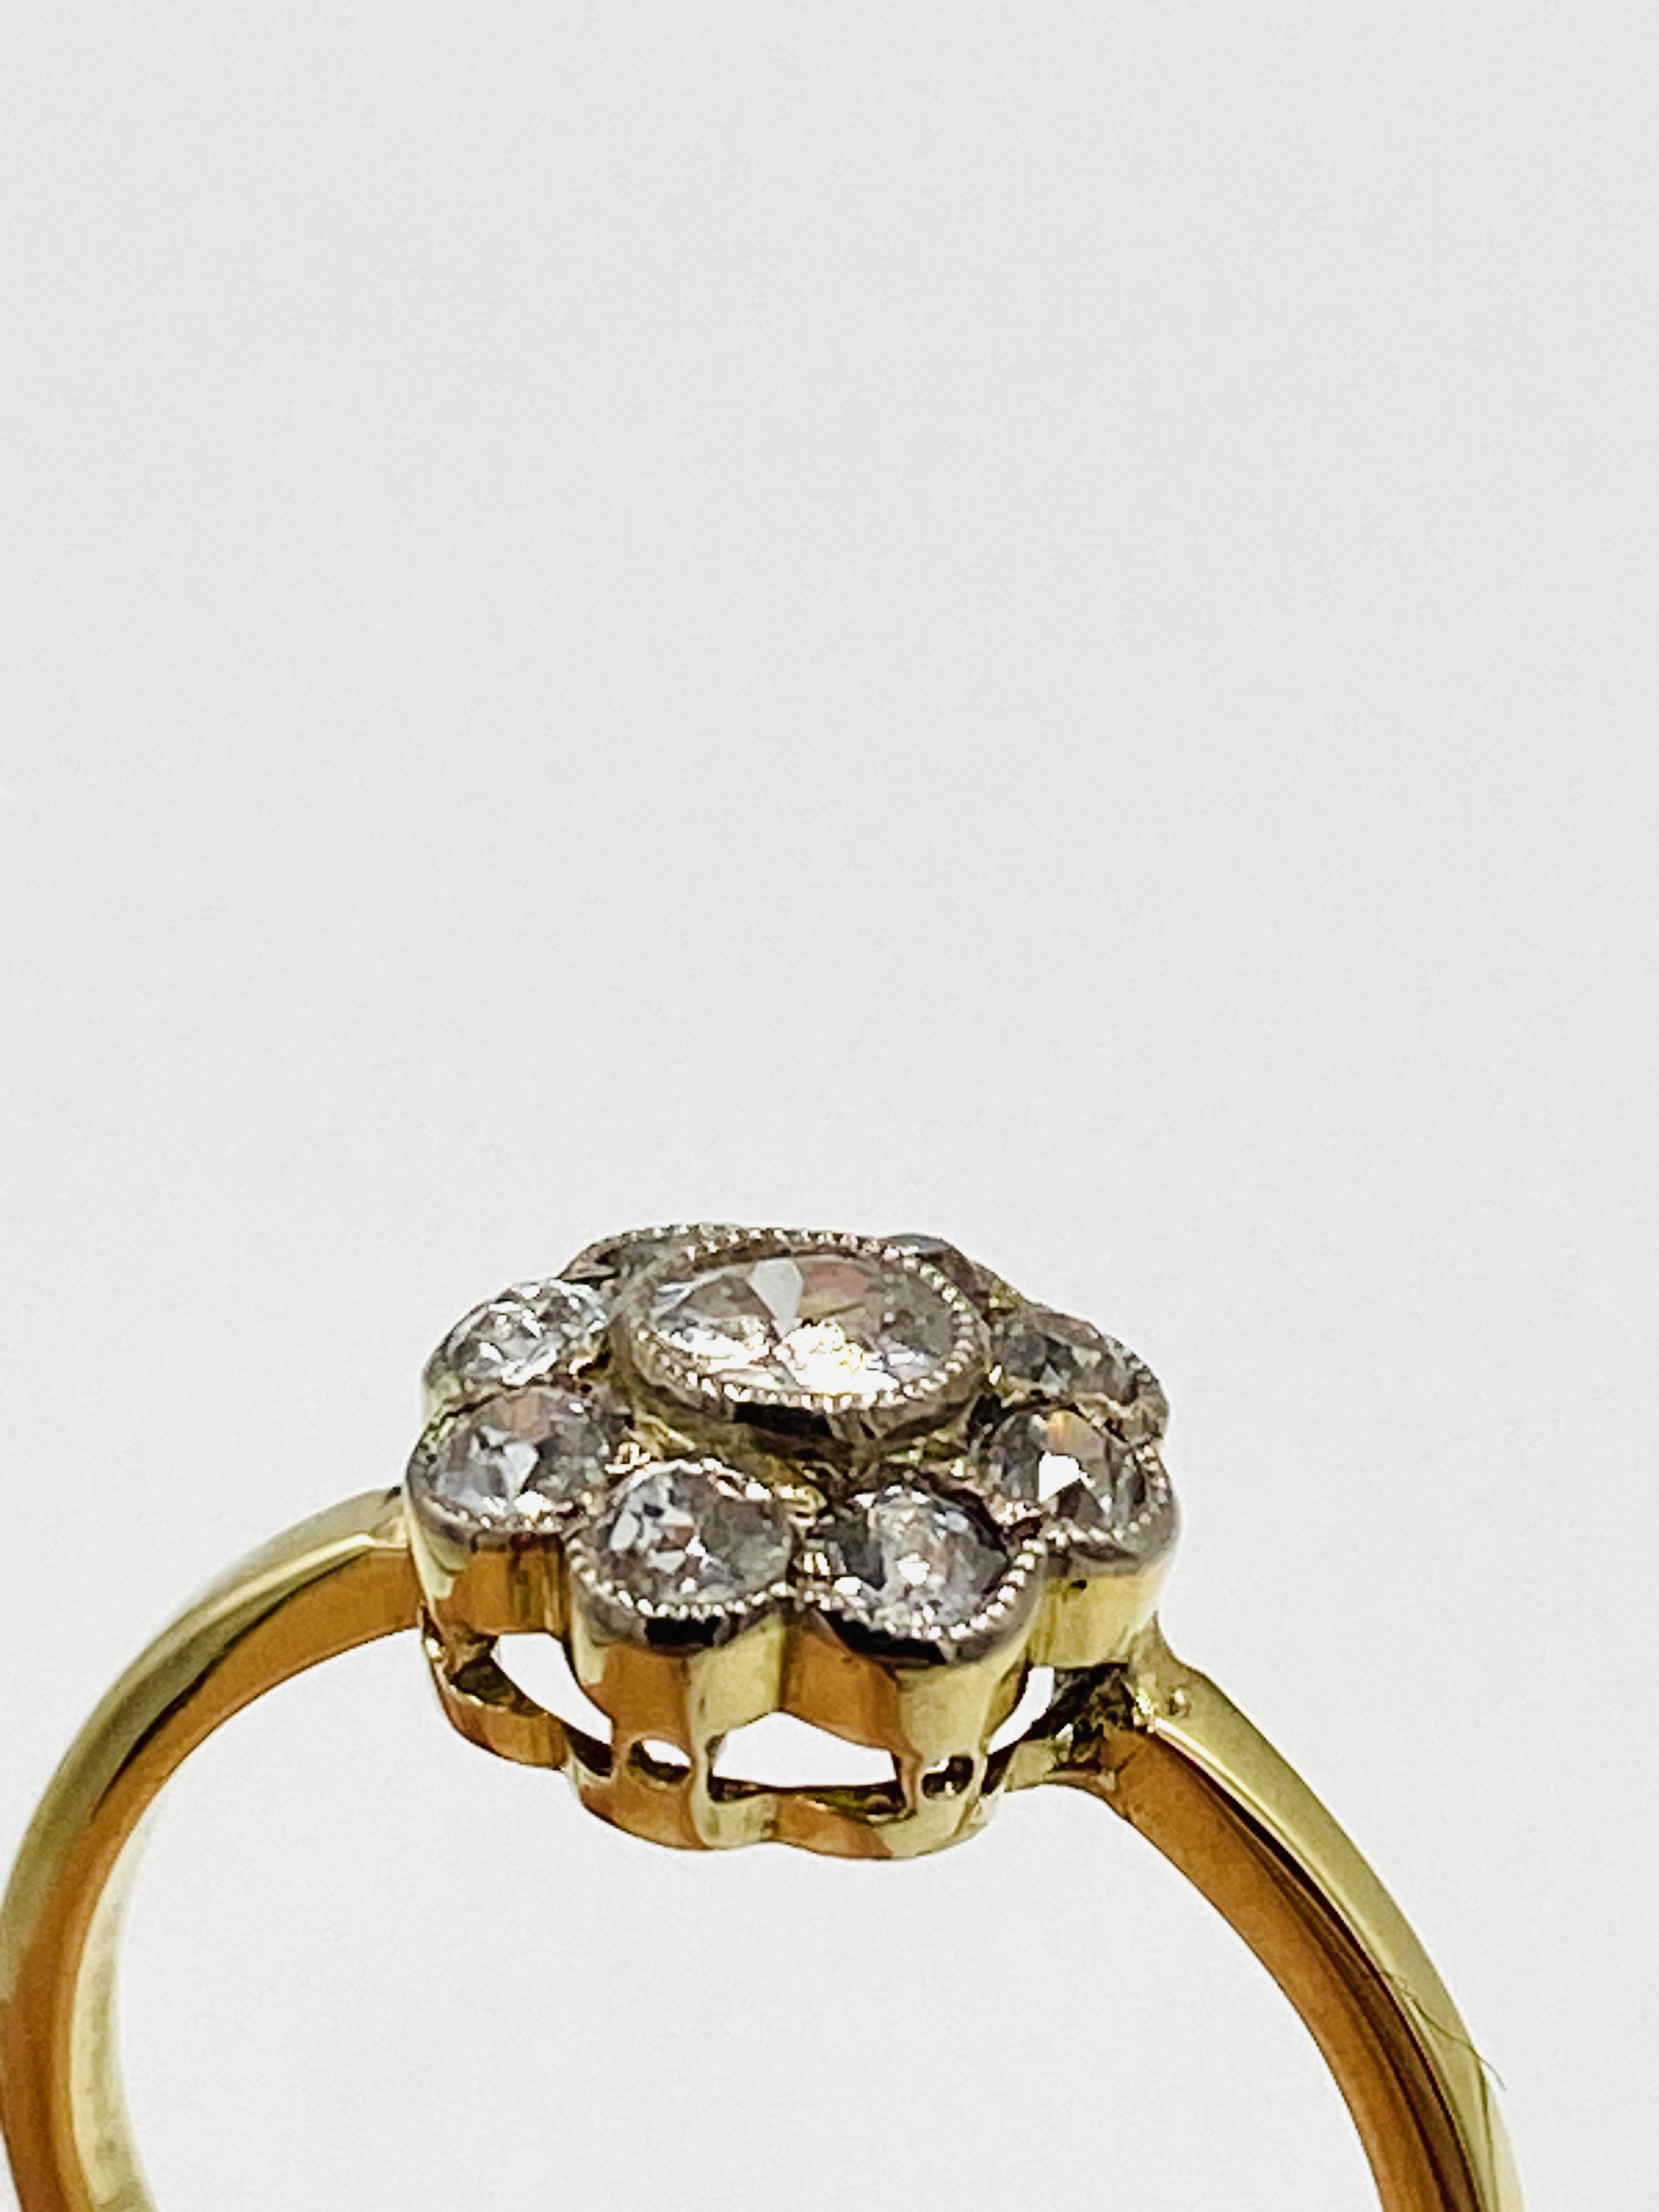 Gold and diamond 'daisy' ring - Image 2 of 6